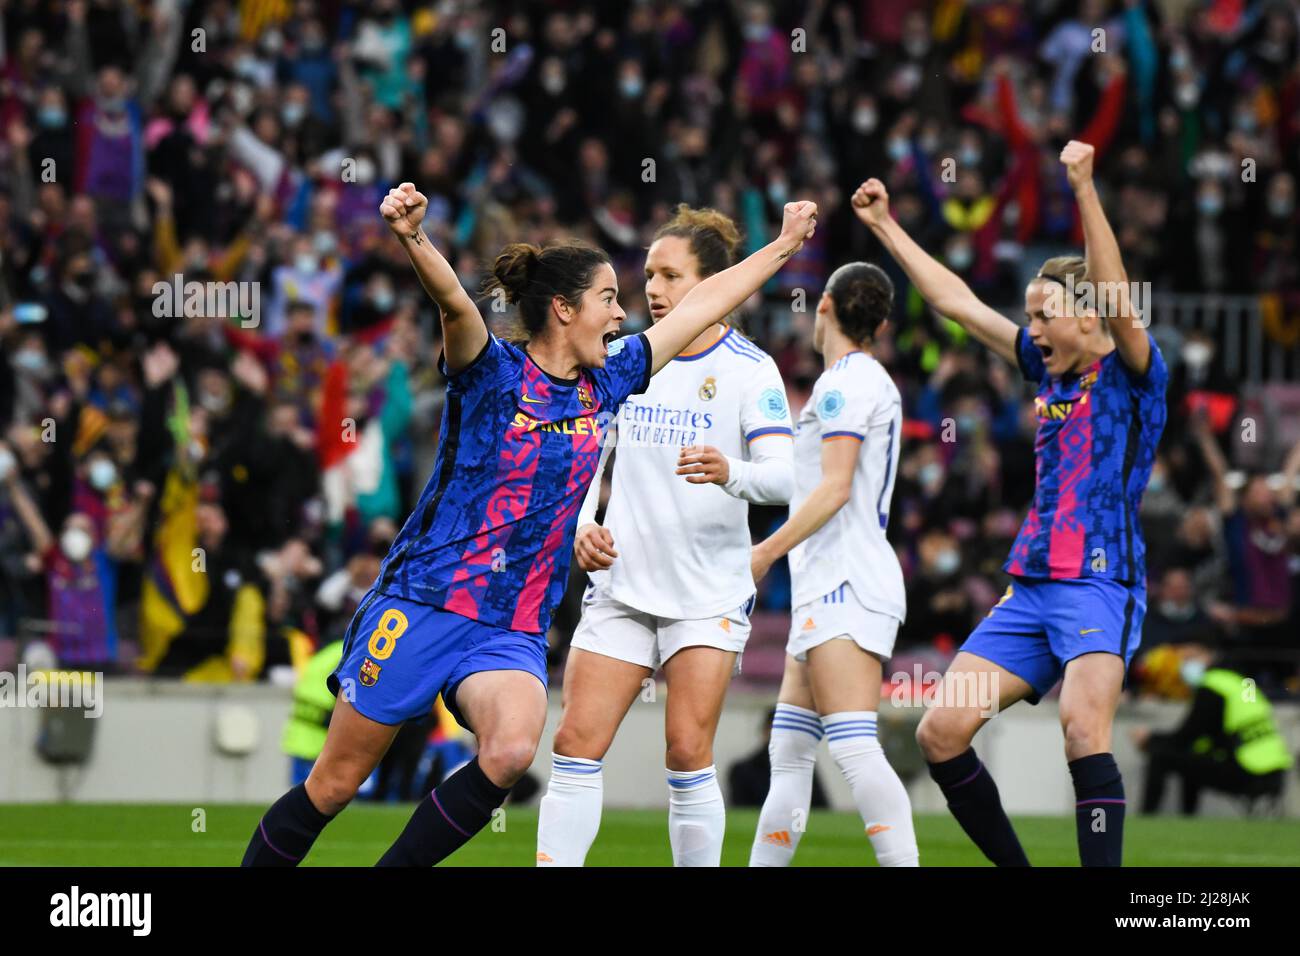 Barcelona, Spain. 30th Mar, 2022. BARCELONA, SPAIN - MARCH 30: Marta of Barcelona celebrates after her team scored a goal during a UEFA Women's Champions League match between Barcelona v Real Madrid at Camp Nou on March 30, 2022 in Barcelona, Spain. (Photo by Sara Aribó/PxImages) Credit: Px Images/Alamy Live News Stock Photo